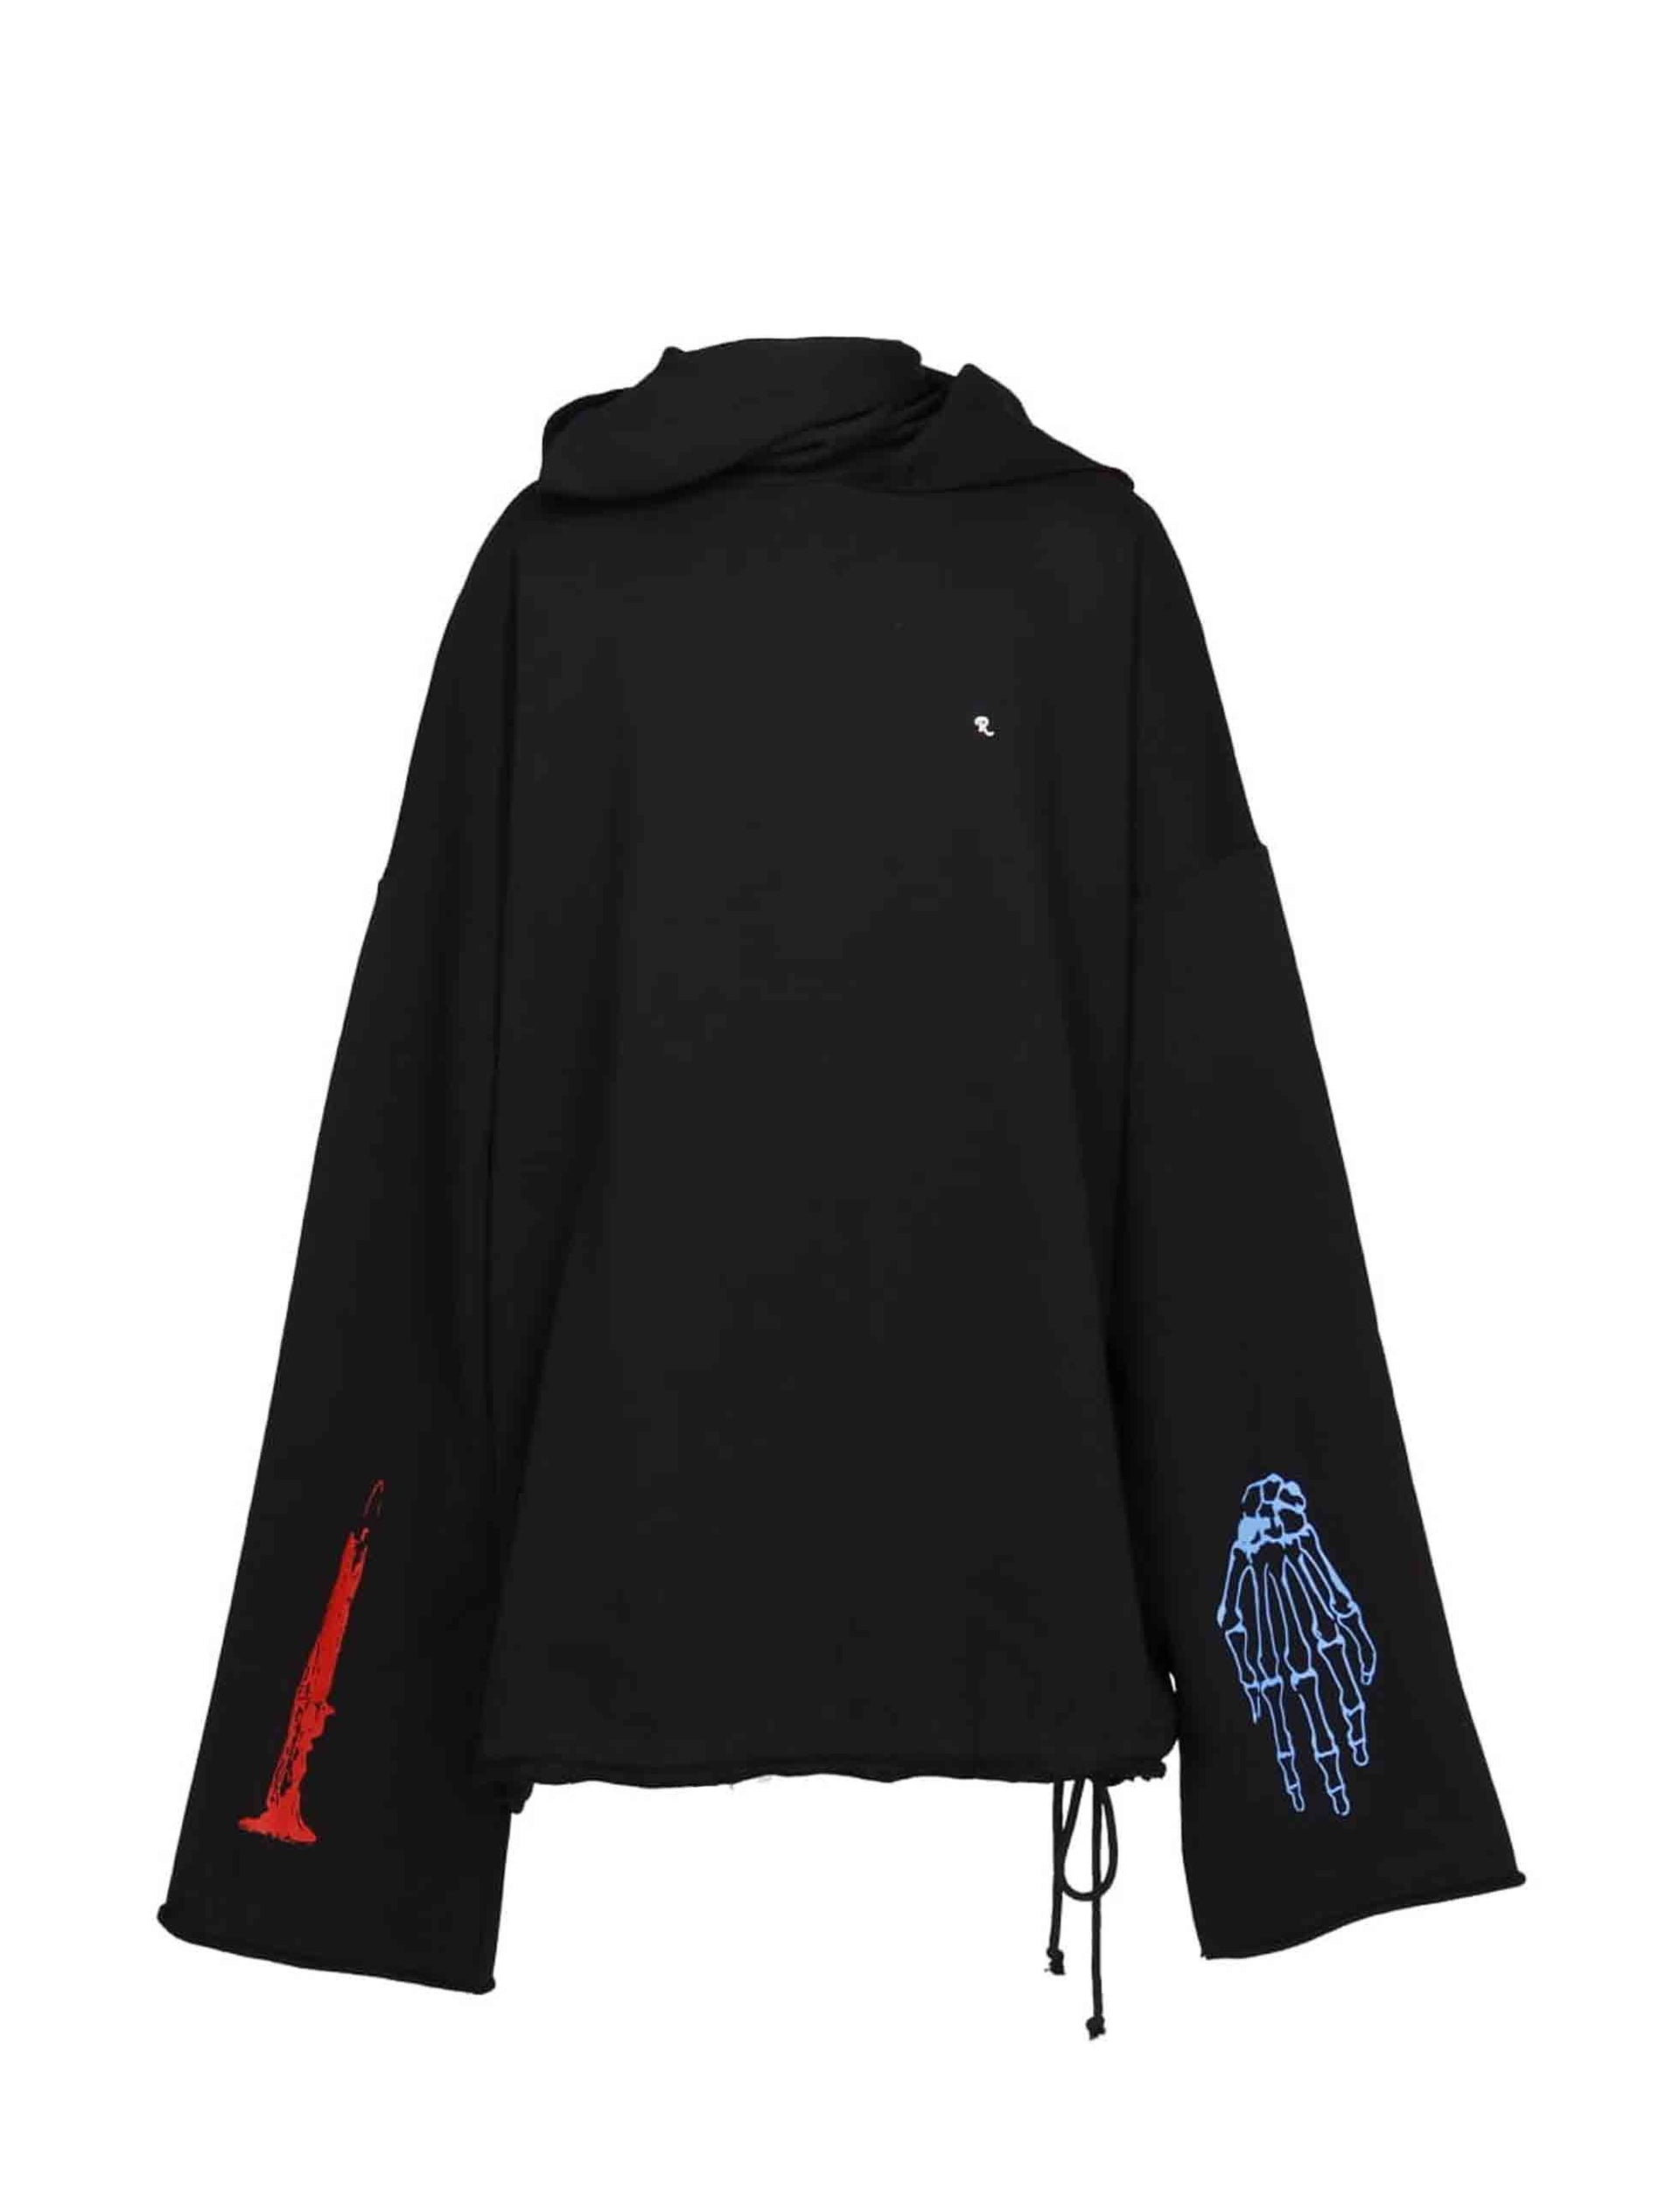 RAF SIMONS Oversized printed scarf hoodie with cords at hem